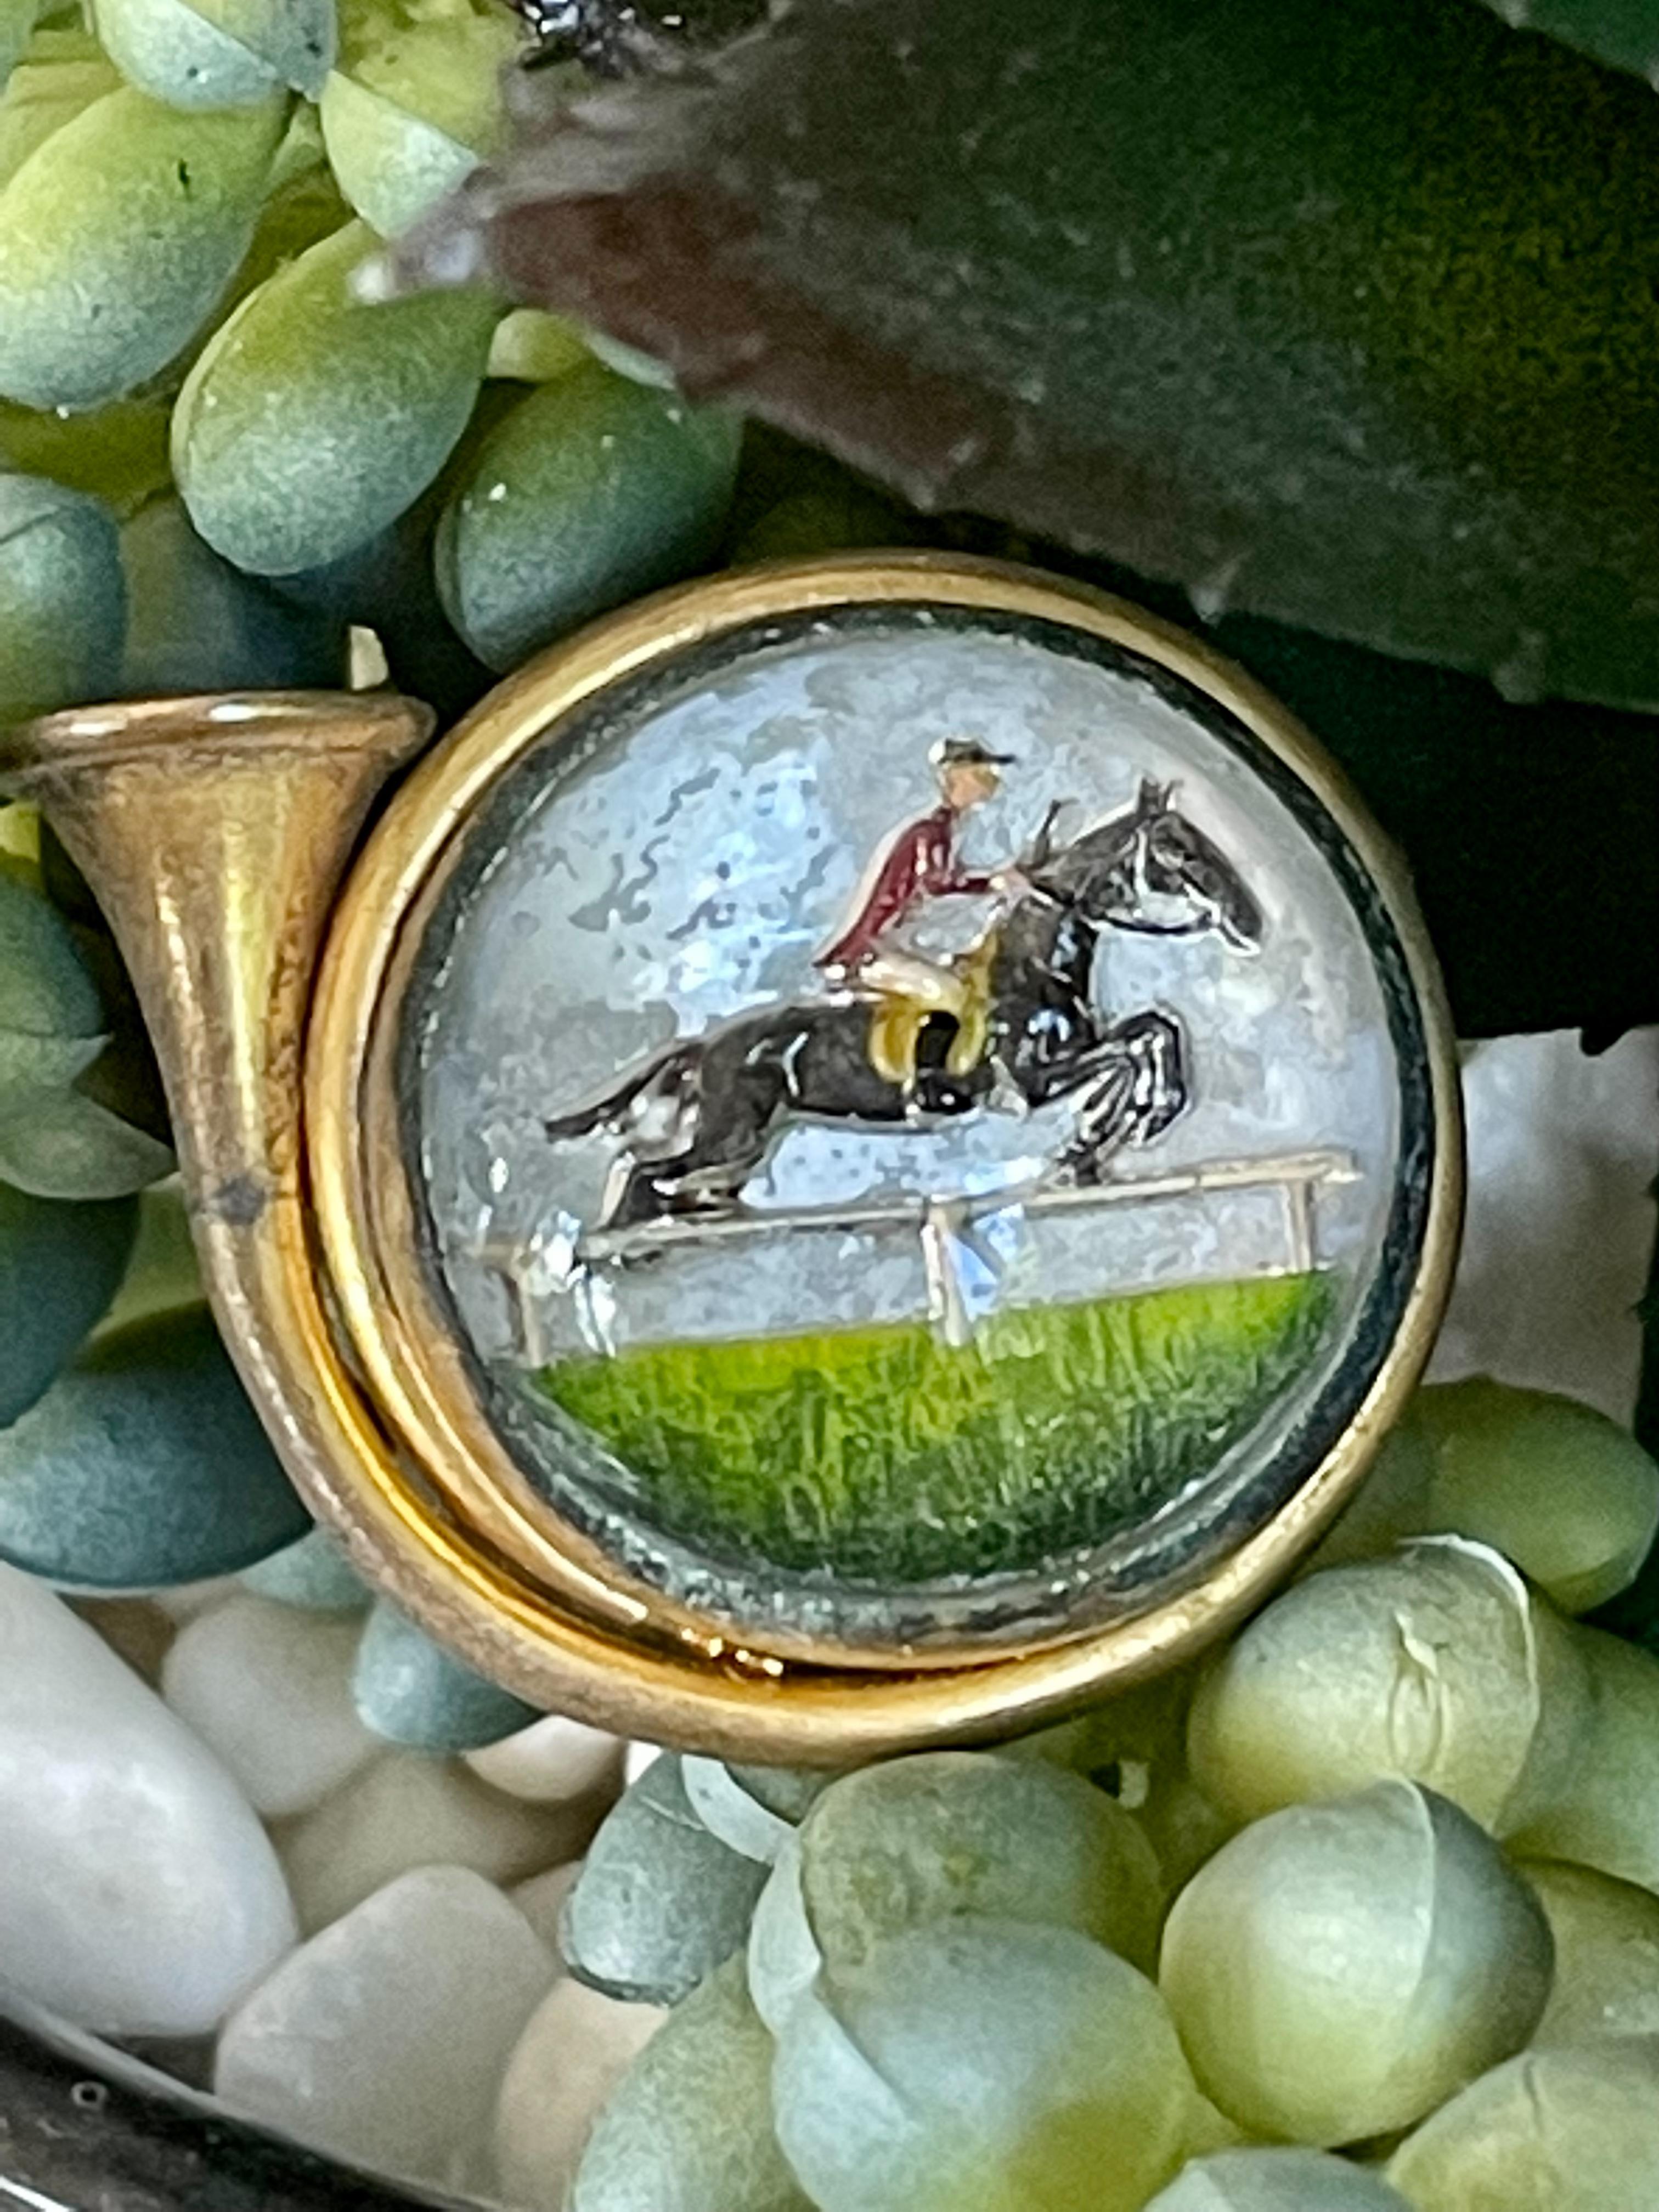 This vintage, antique French Horn Essex Crystal Glass Brooch is reverse painted and features a horse and rider scene.

Tested: 10k

No Stamp
Dimension: approximately 1